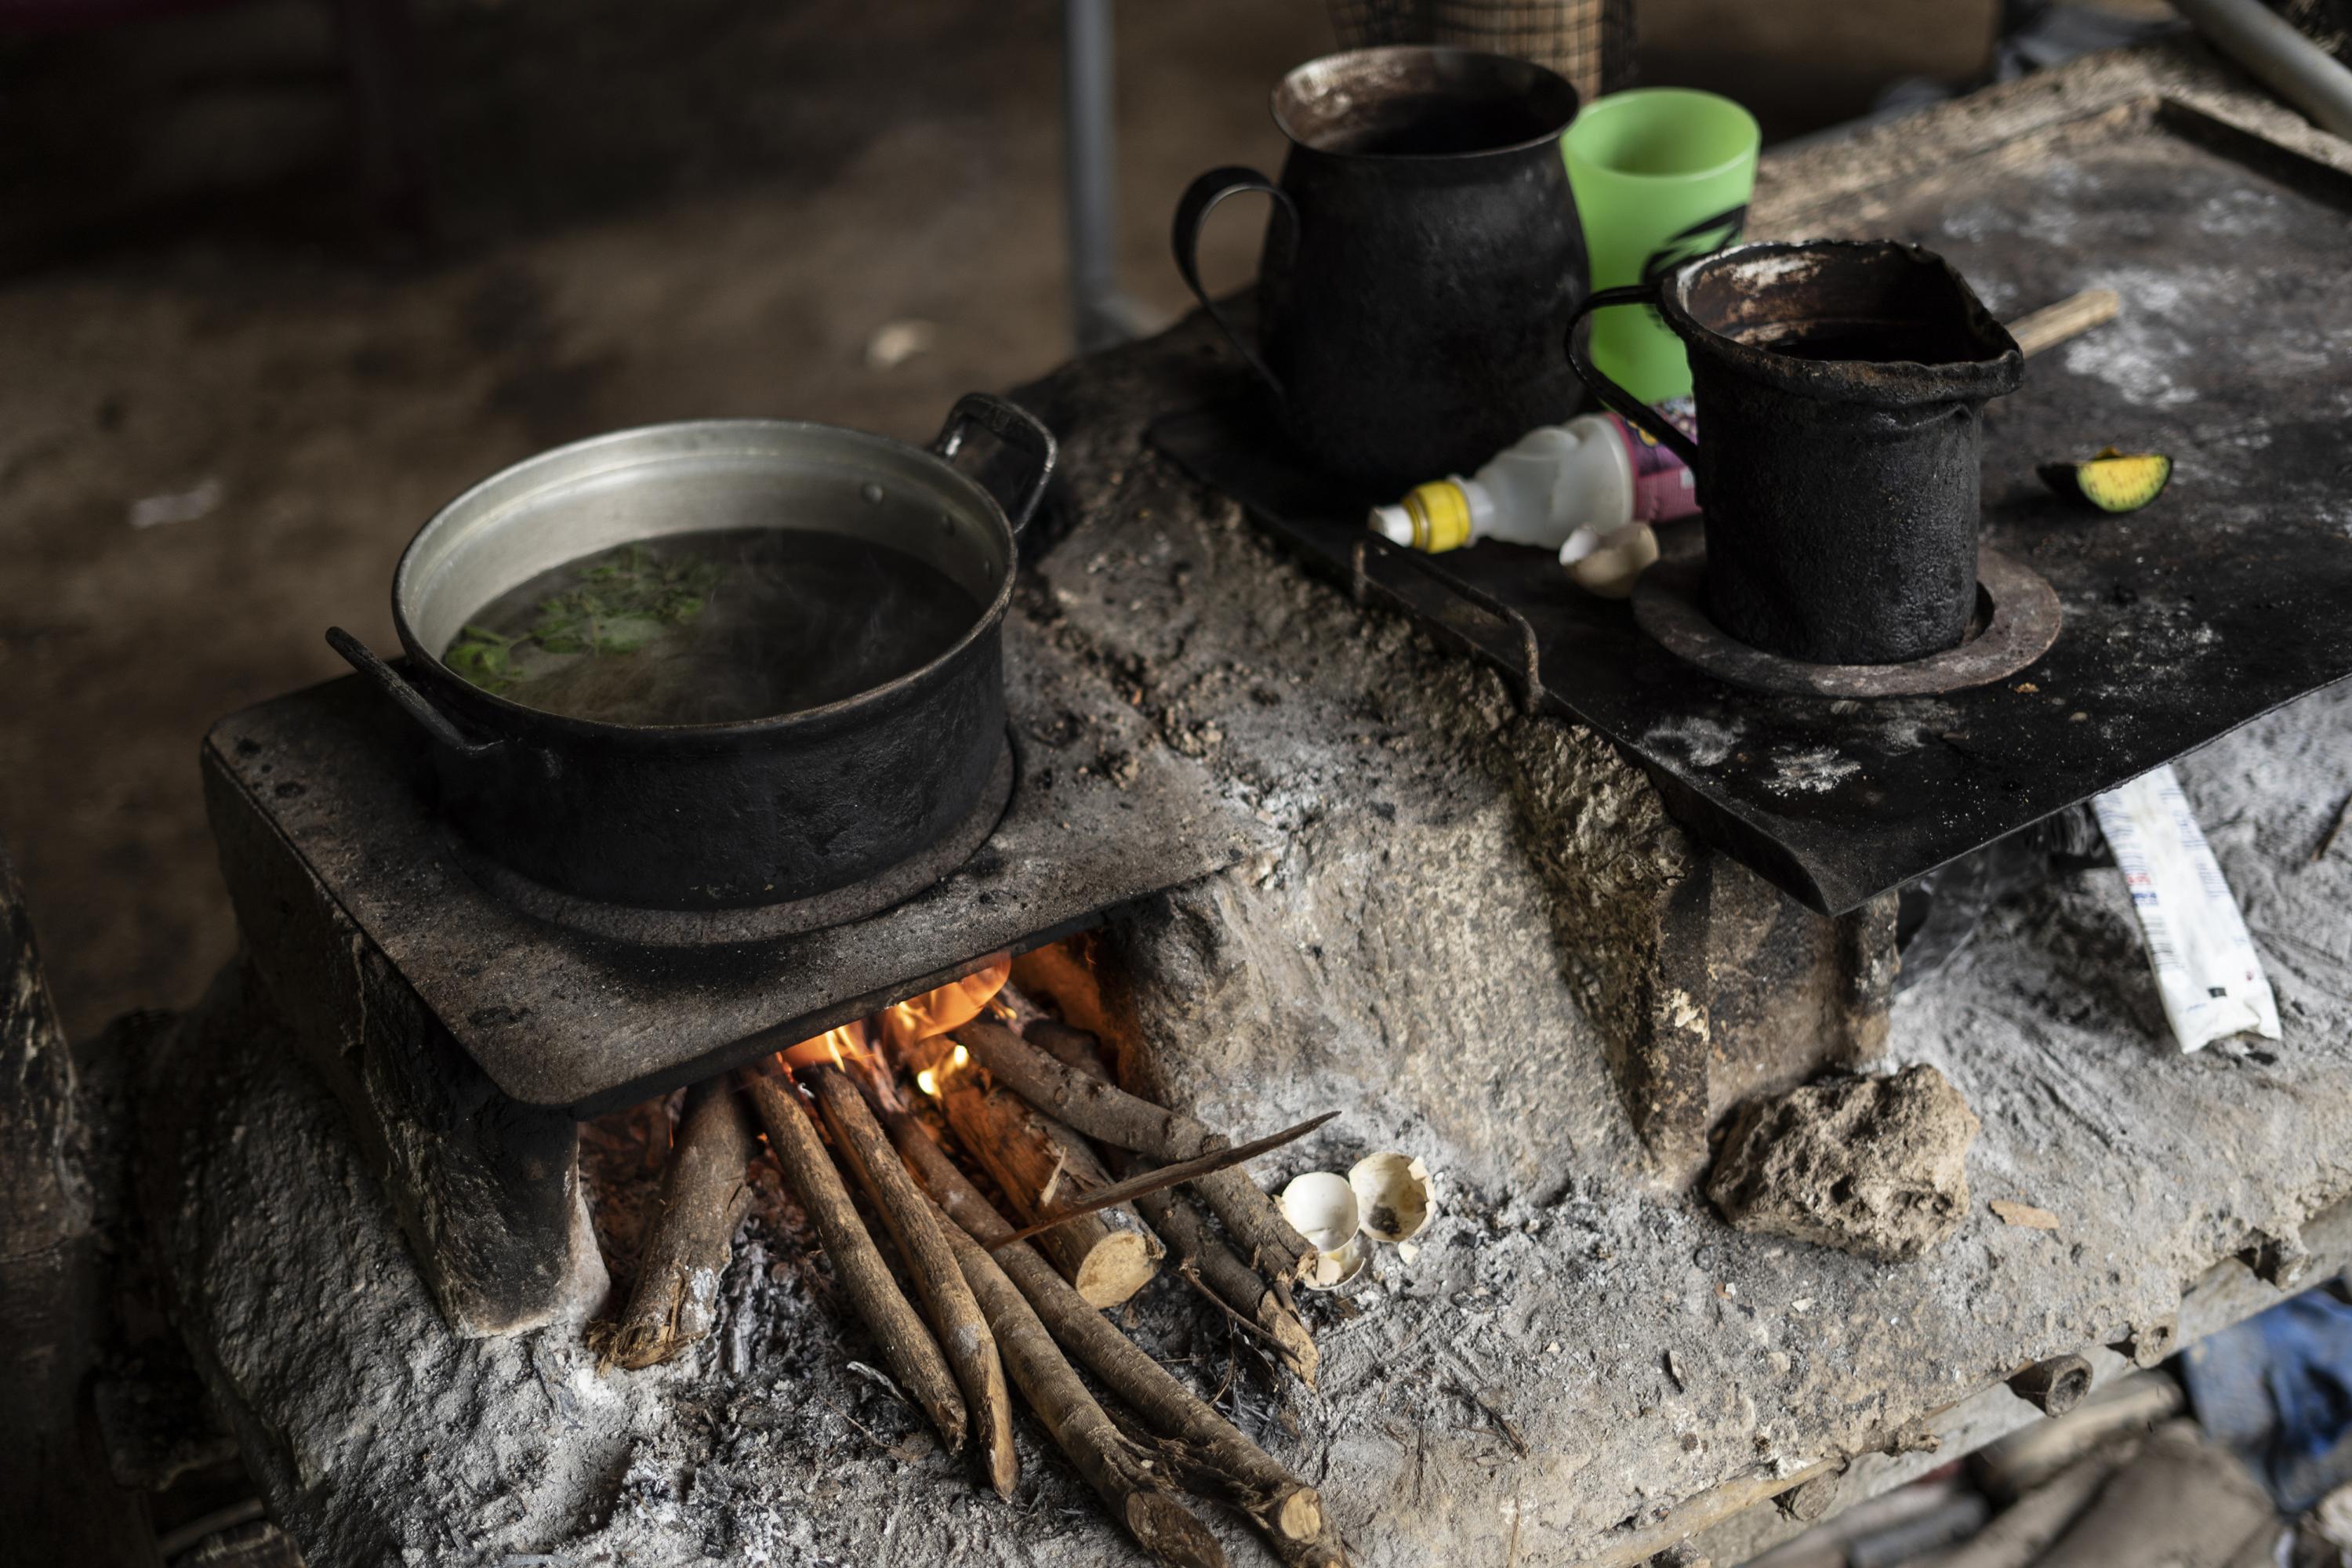 Ruth’s propane tank typically lasts her large family just ten days. The other 20 days, they cook with firewood they collect from the surrounding coffee plantations. Today, the only food in their kitchen is a jar of coffee and a container of beans. Photo Víctor Peña